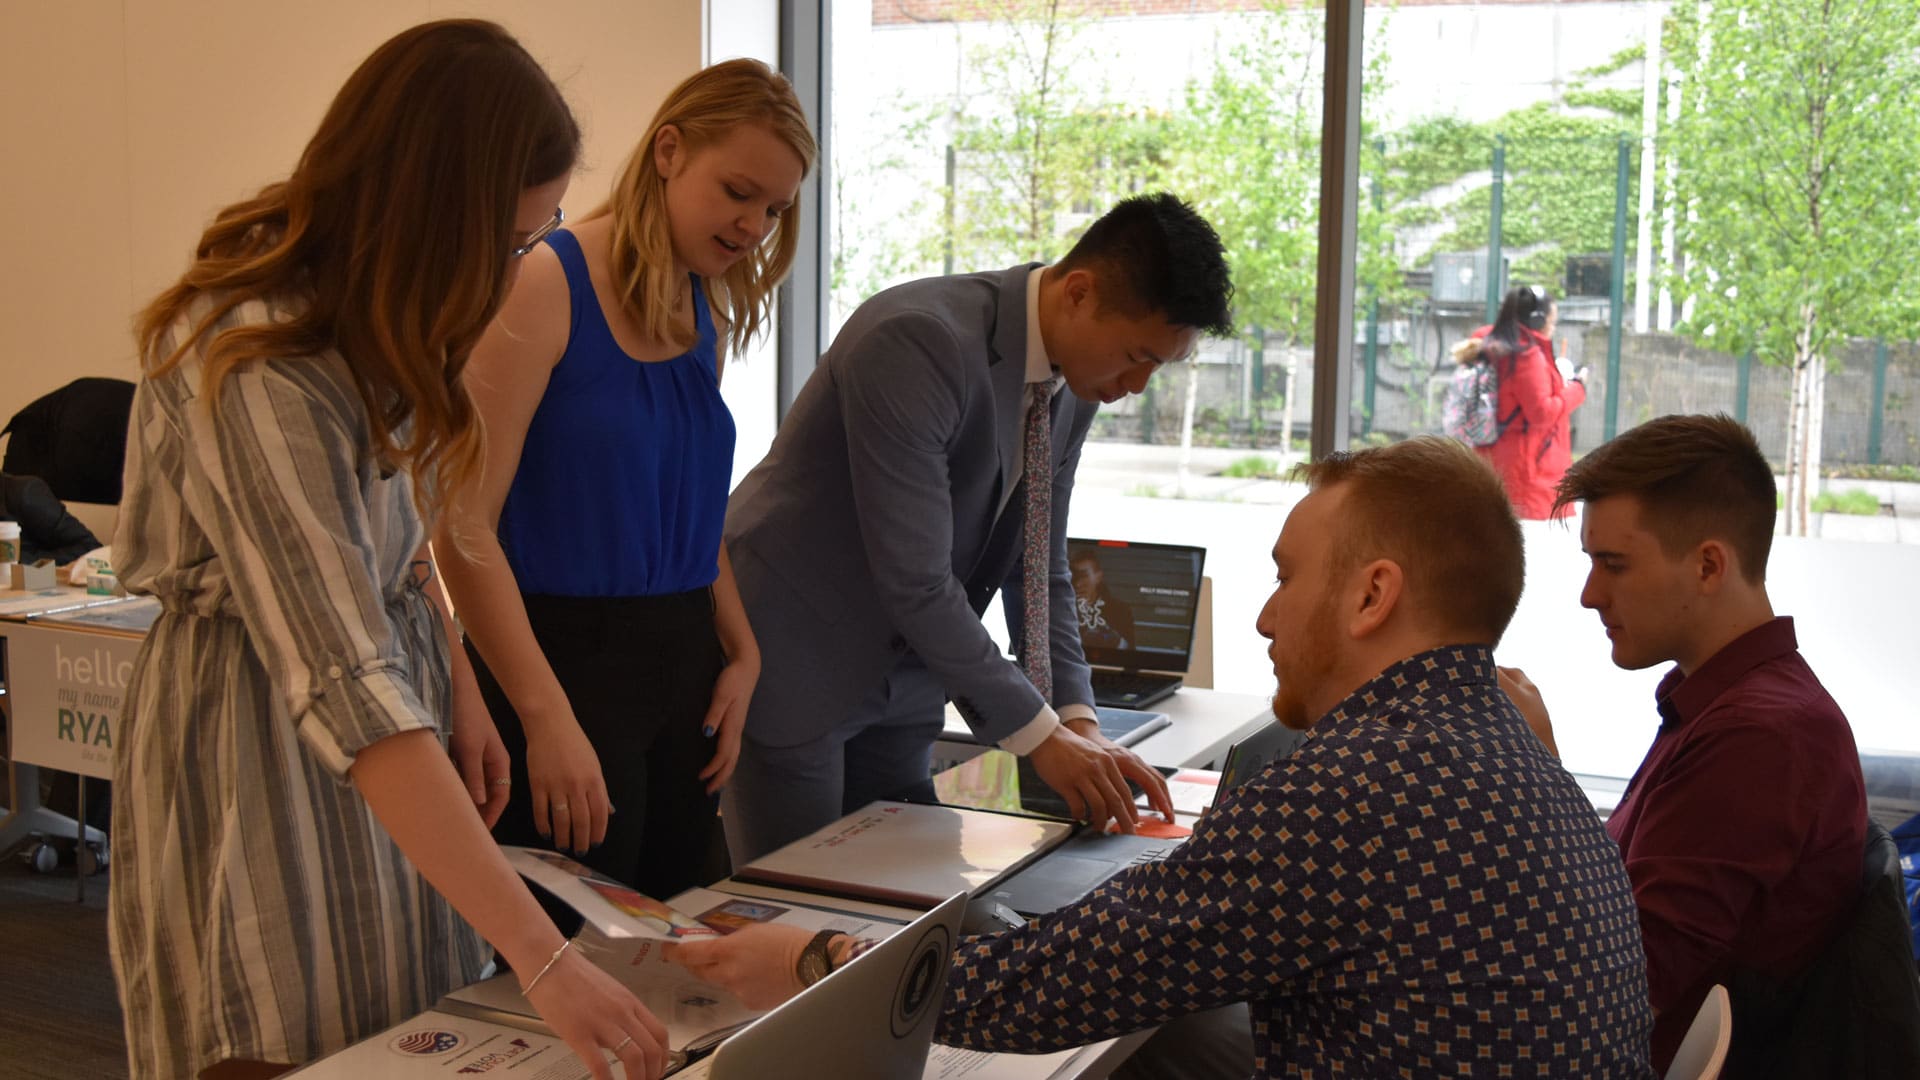 Students show their portfolios at the event.